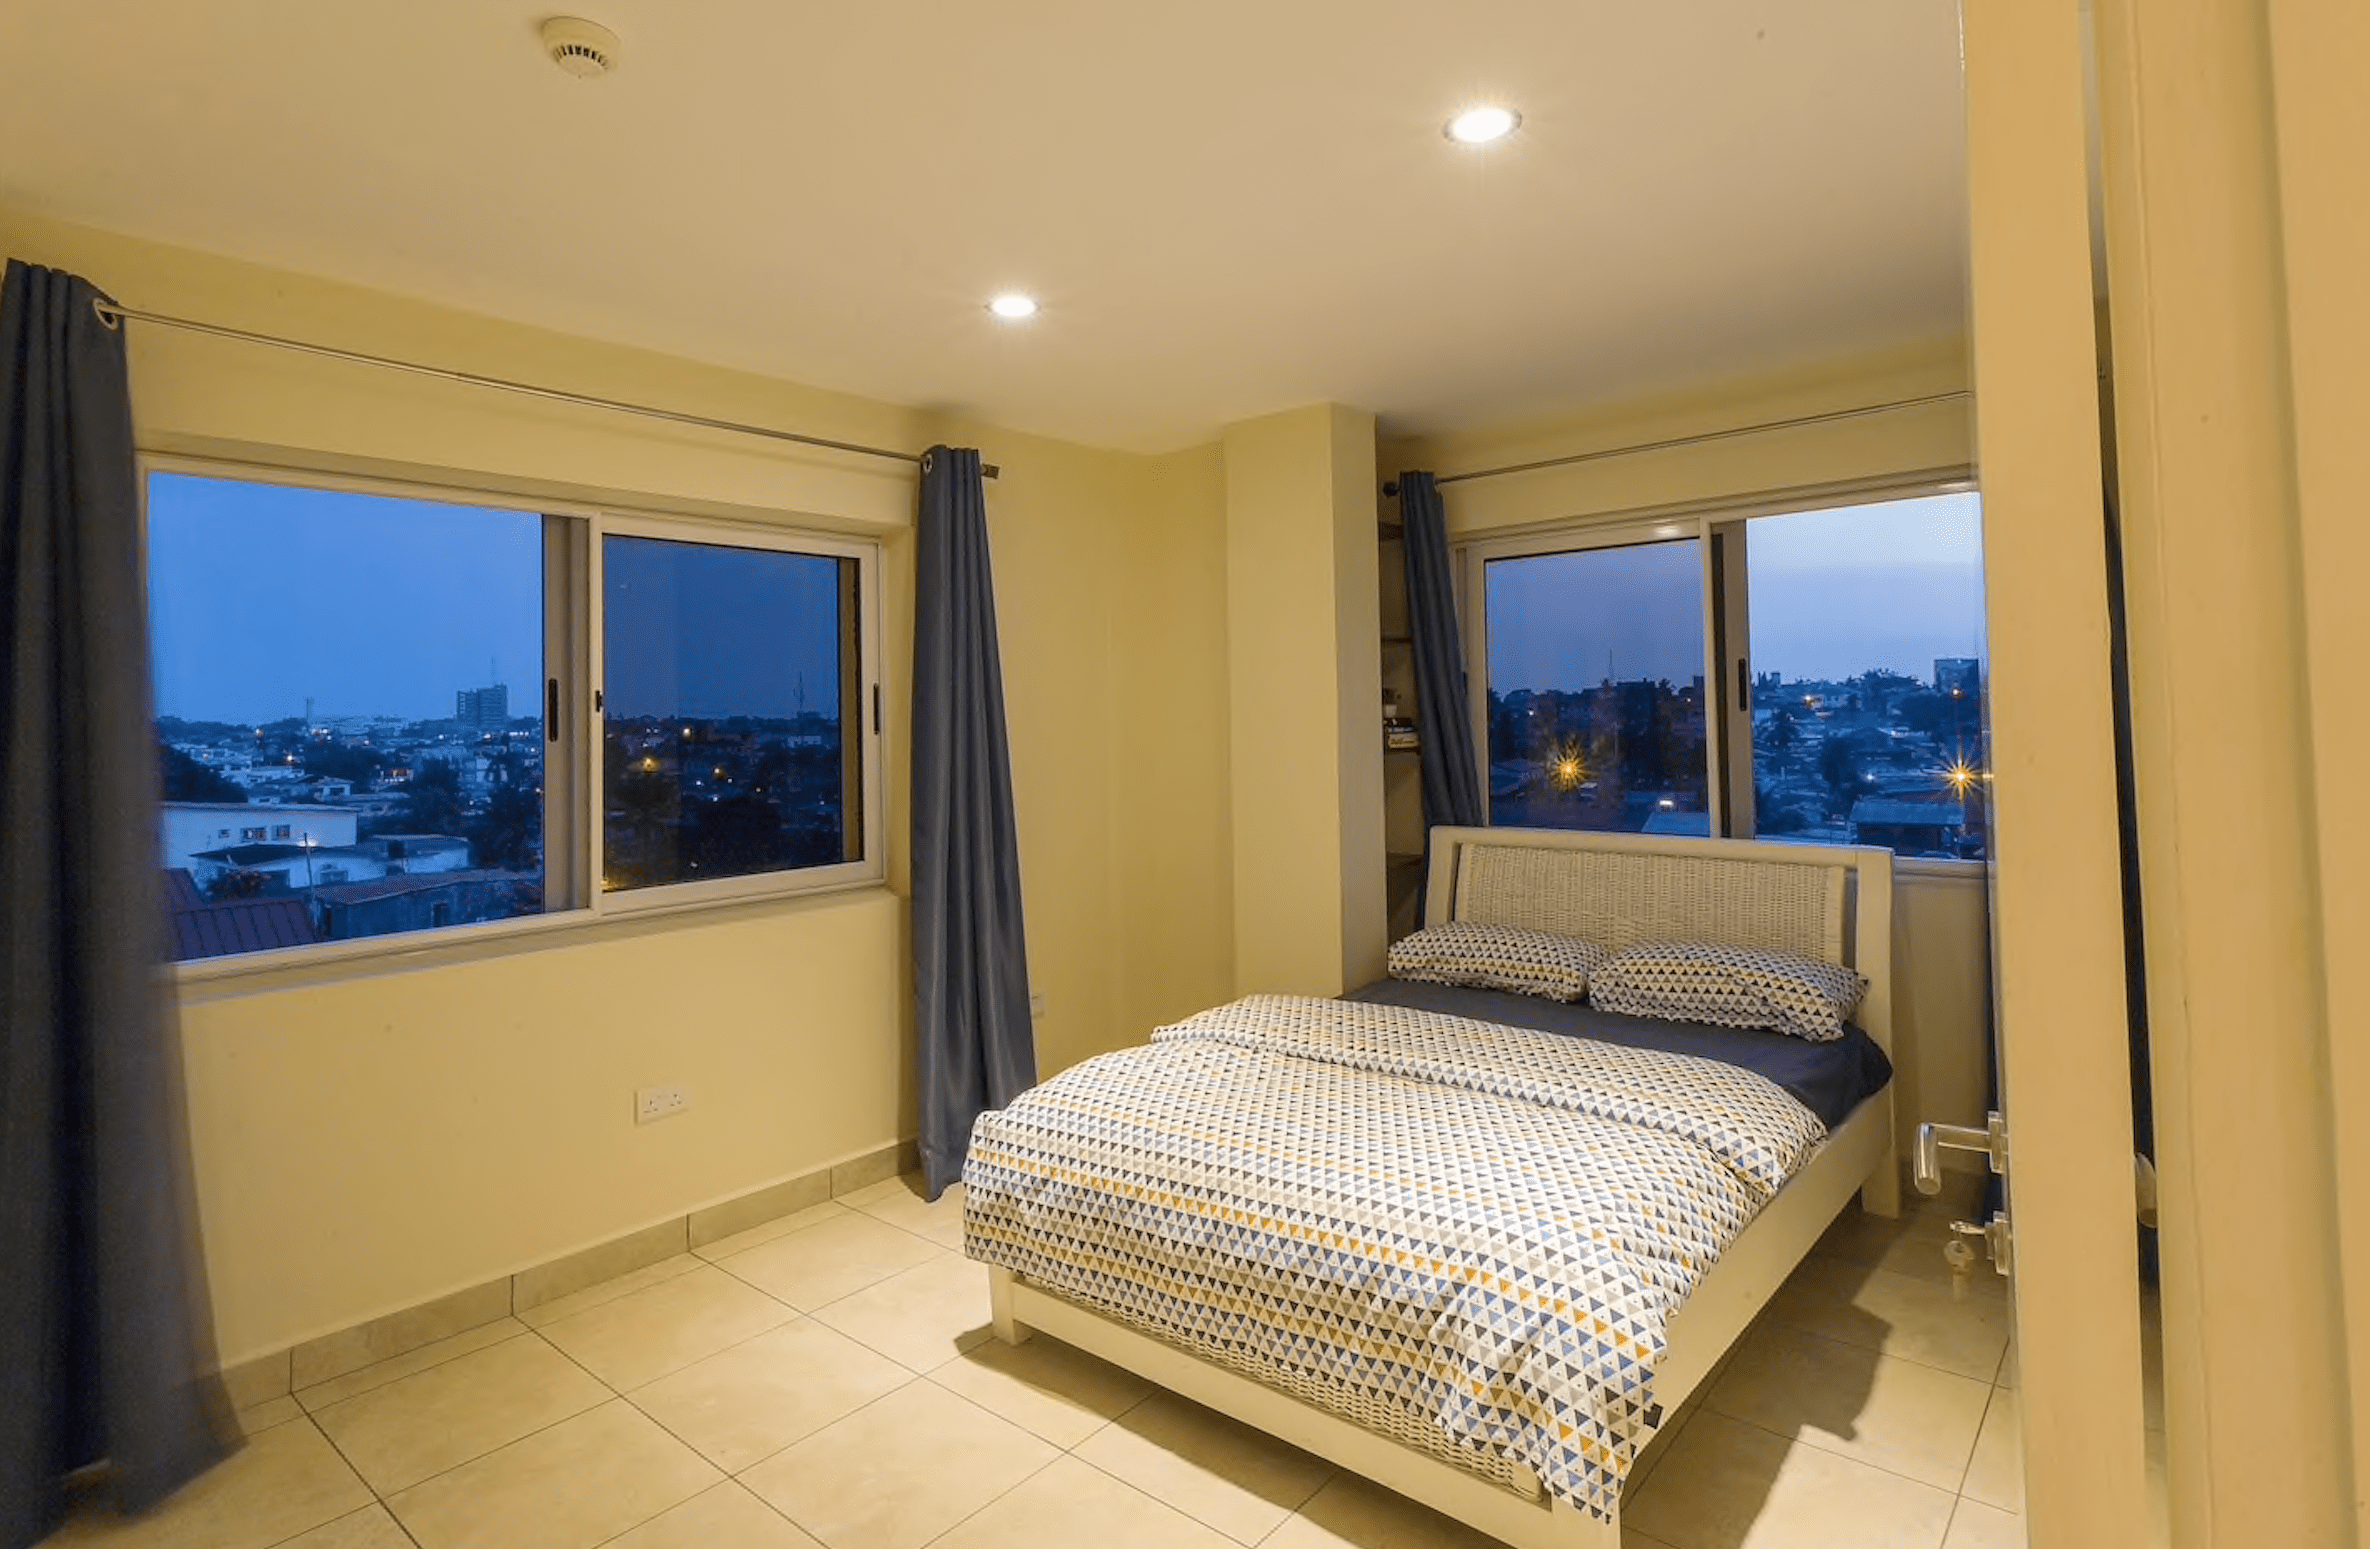 accra penthouse airbnb